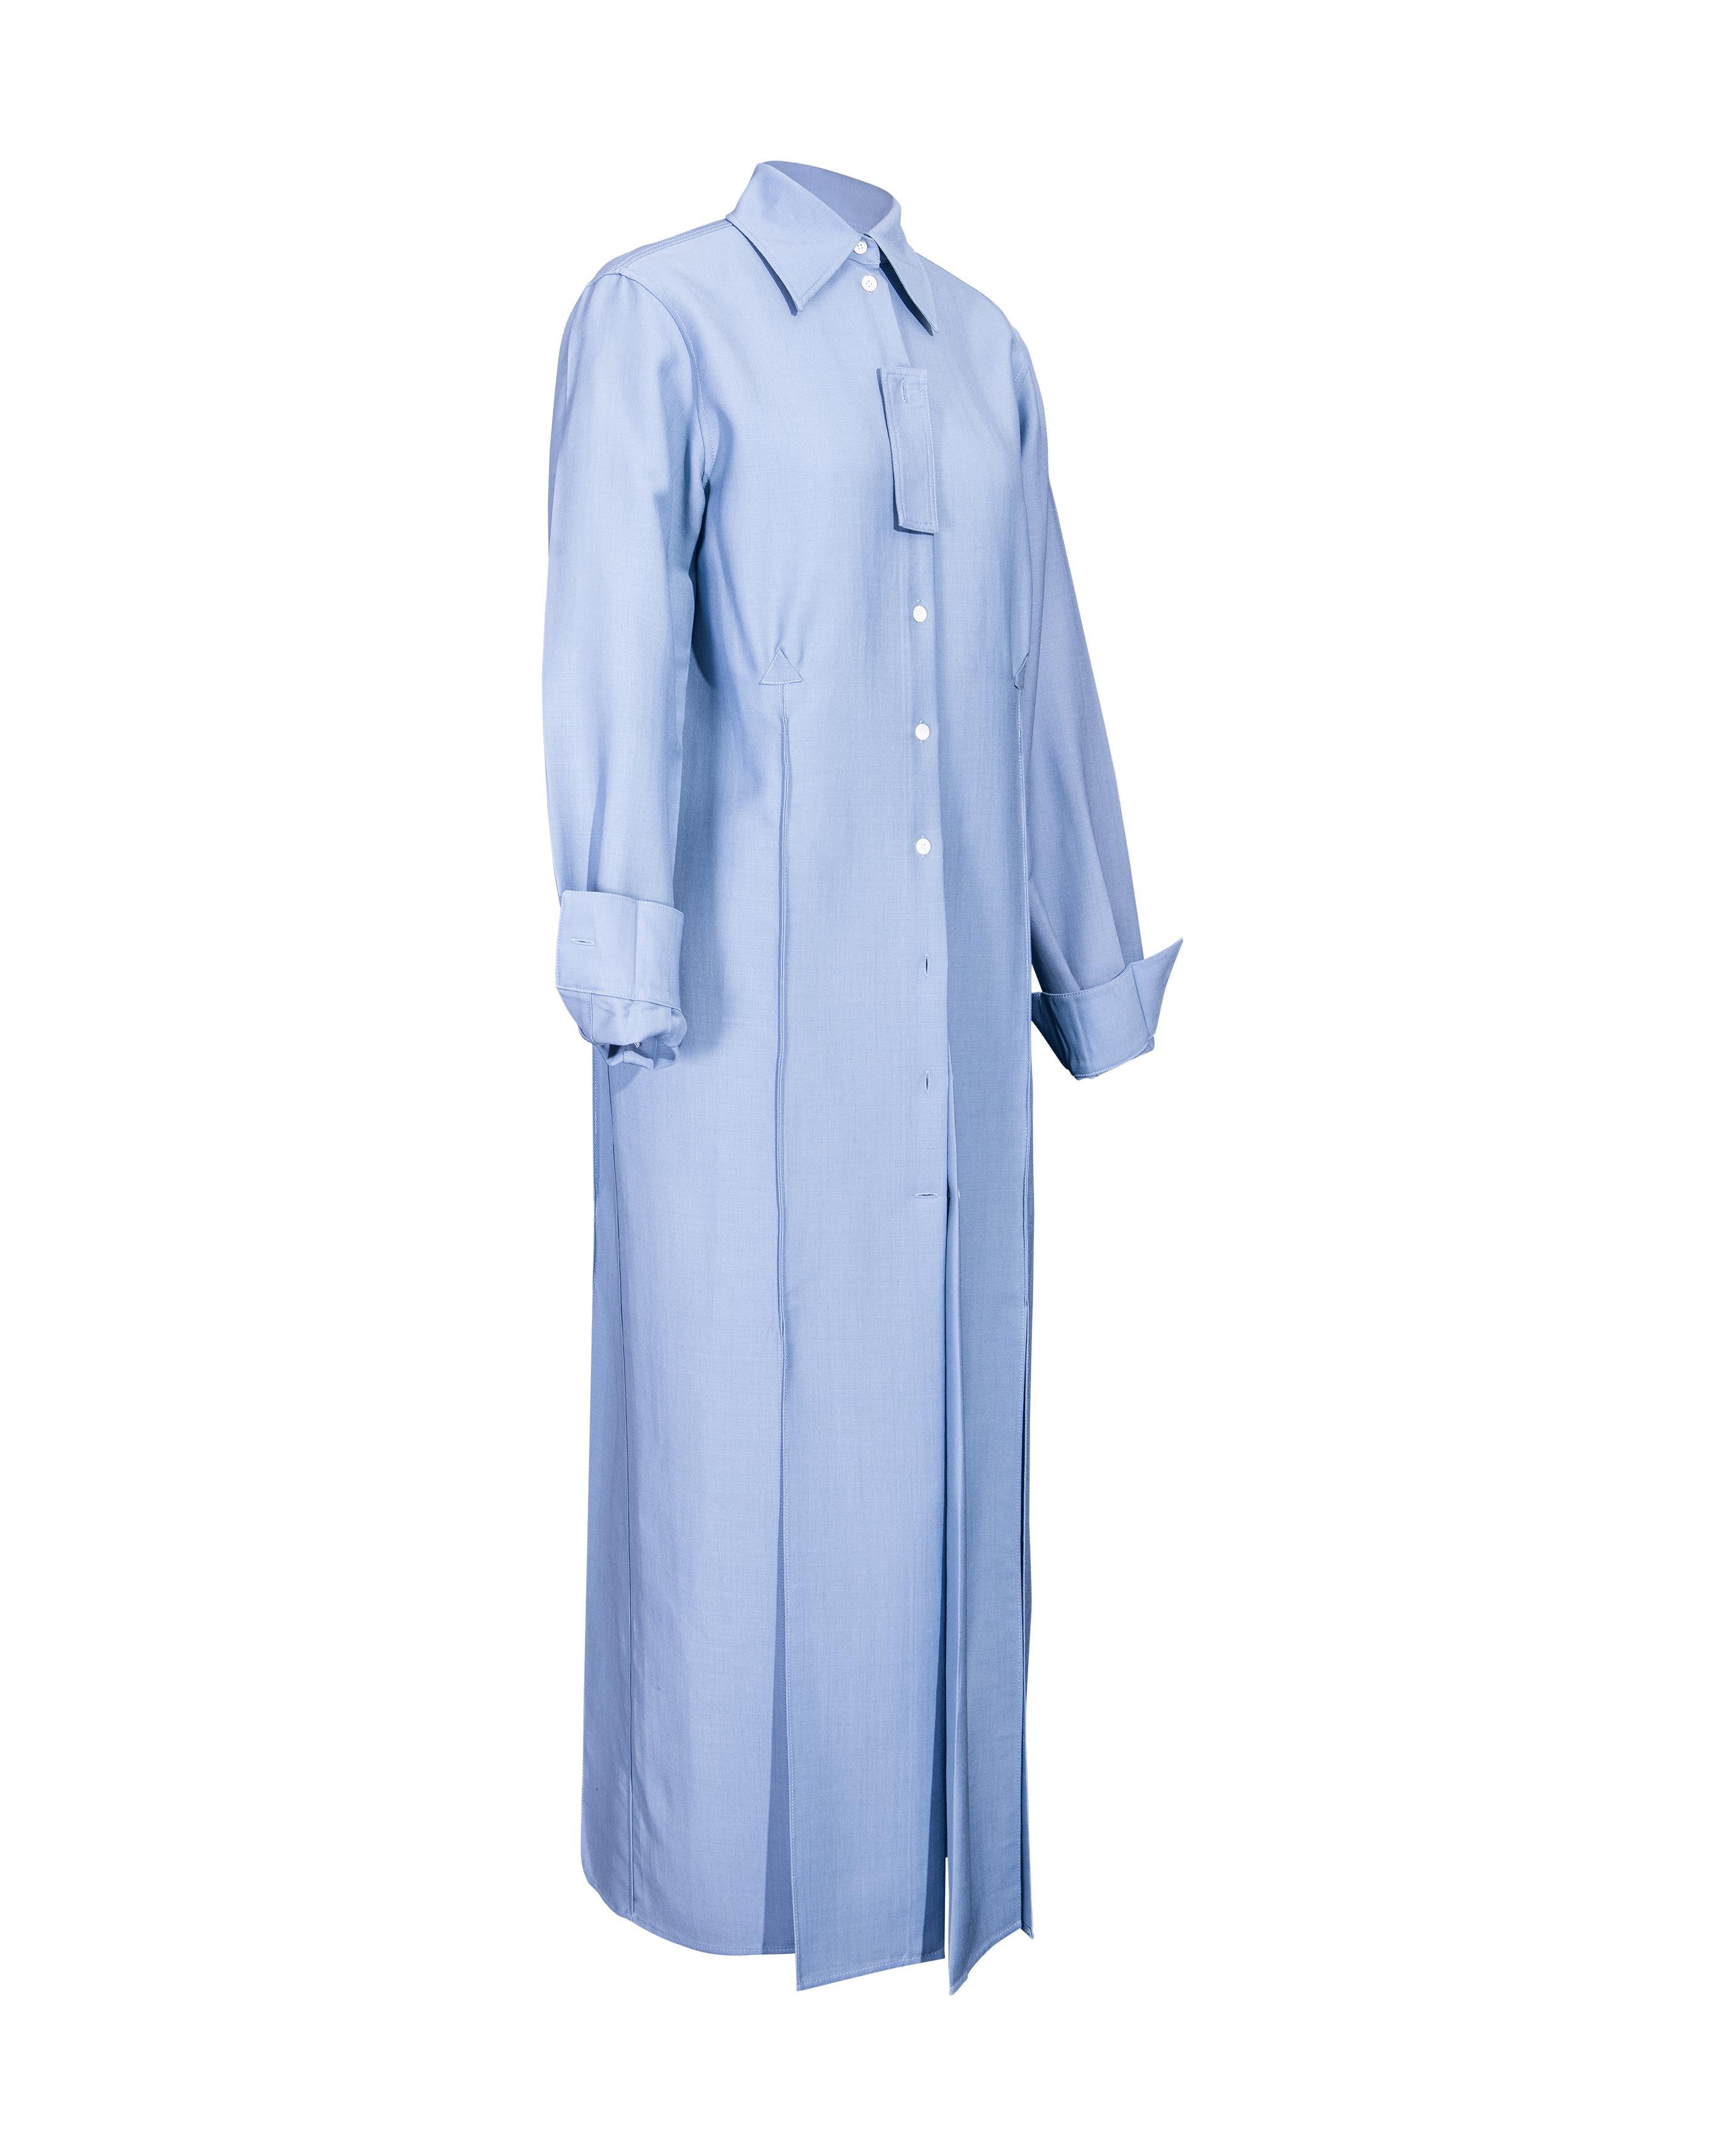 A/W 2017 Céline by Phoebe Philo Button-Up Light Blue Shirt Dress In Excellent Condition For Sale In North Hollywood, CA